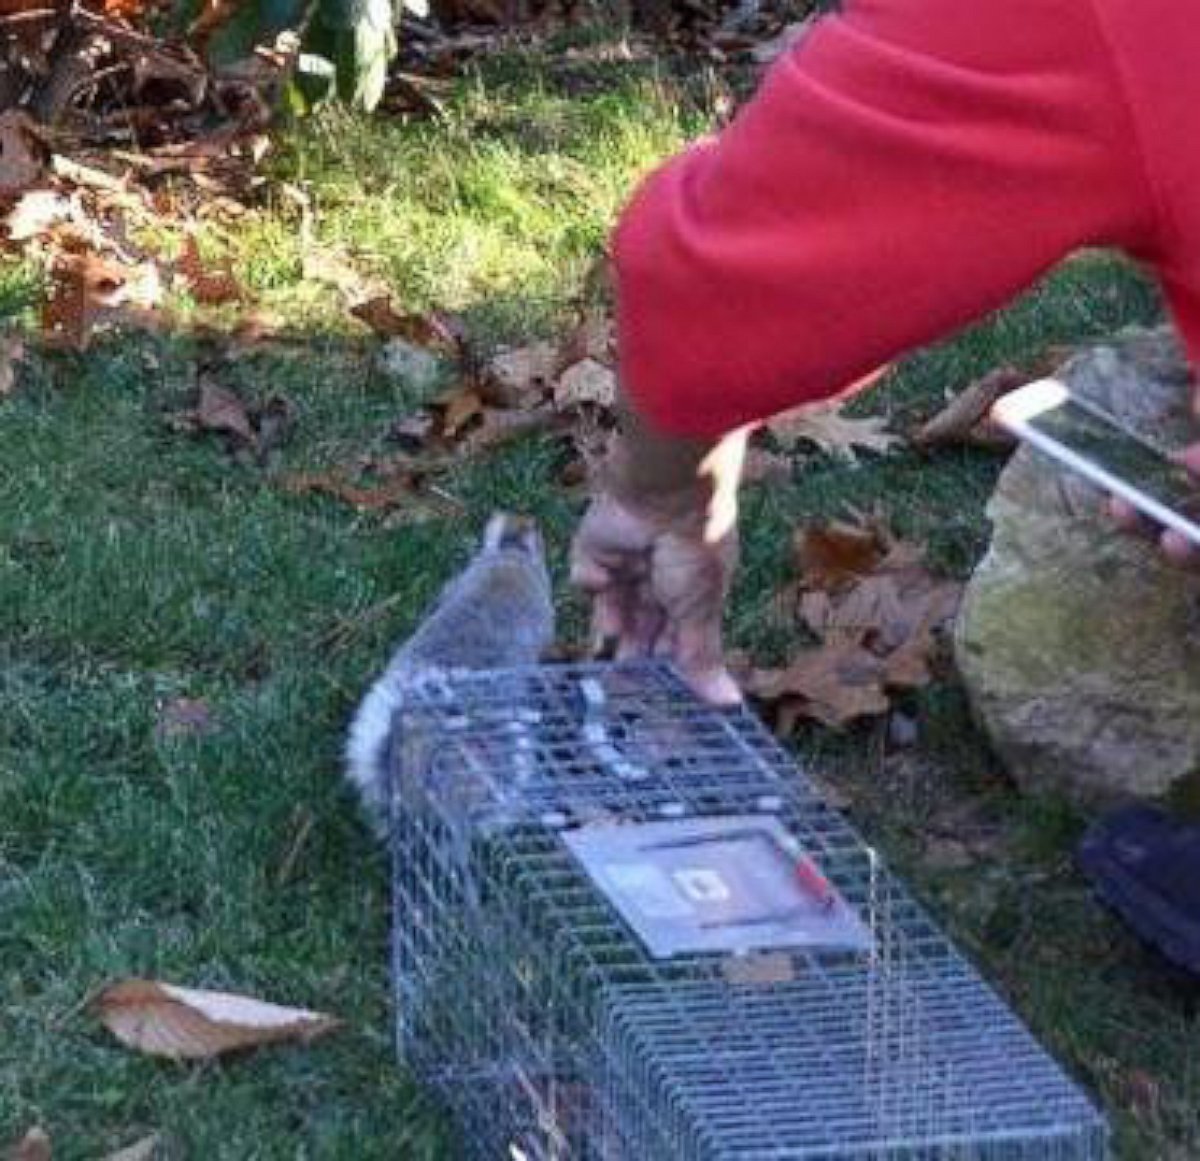 PHOTO: The Animal Rescue League helped save a squirrel that was found with what appeared to be a dog bone stuck around its neck. 